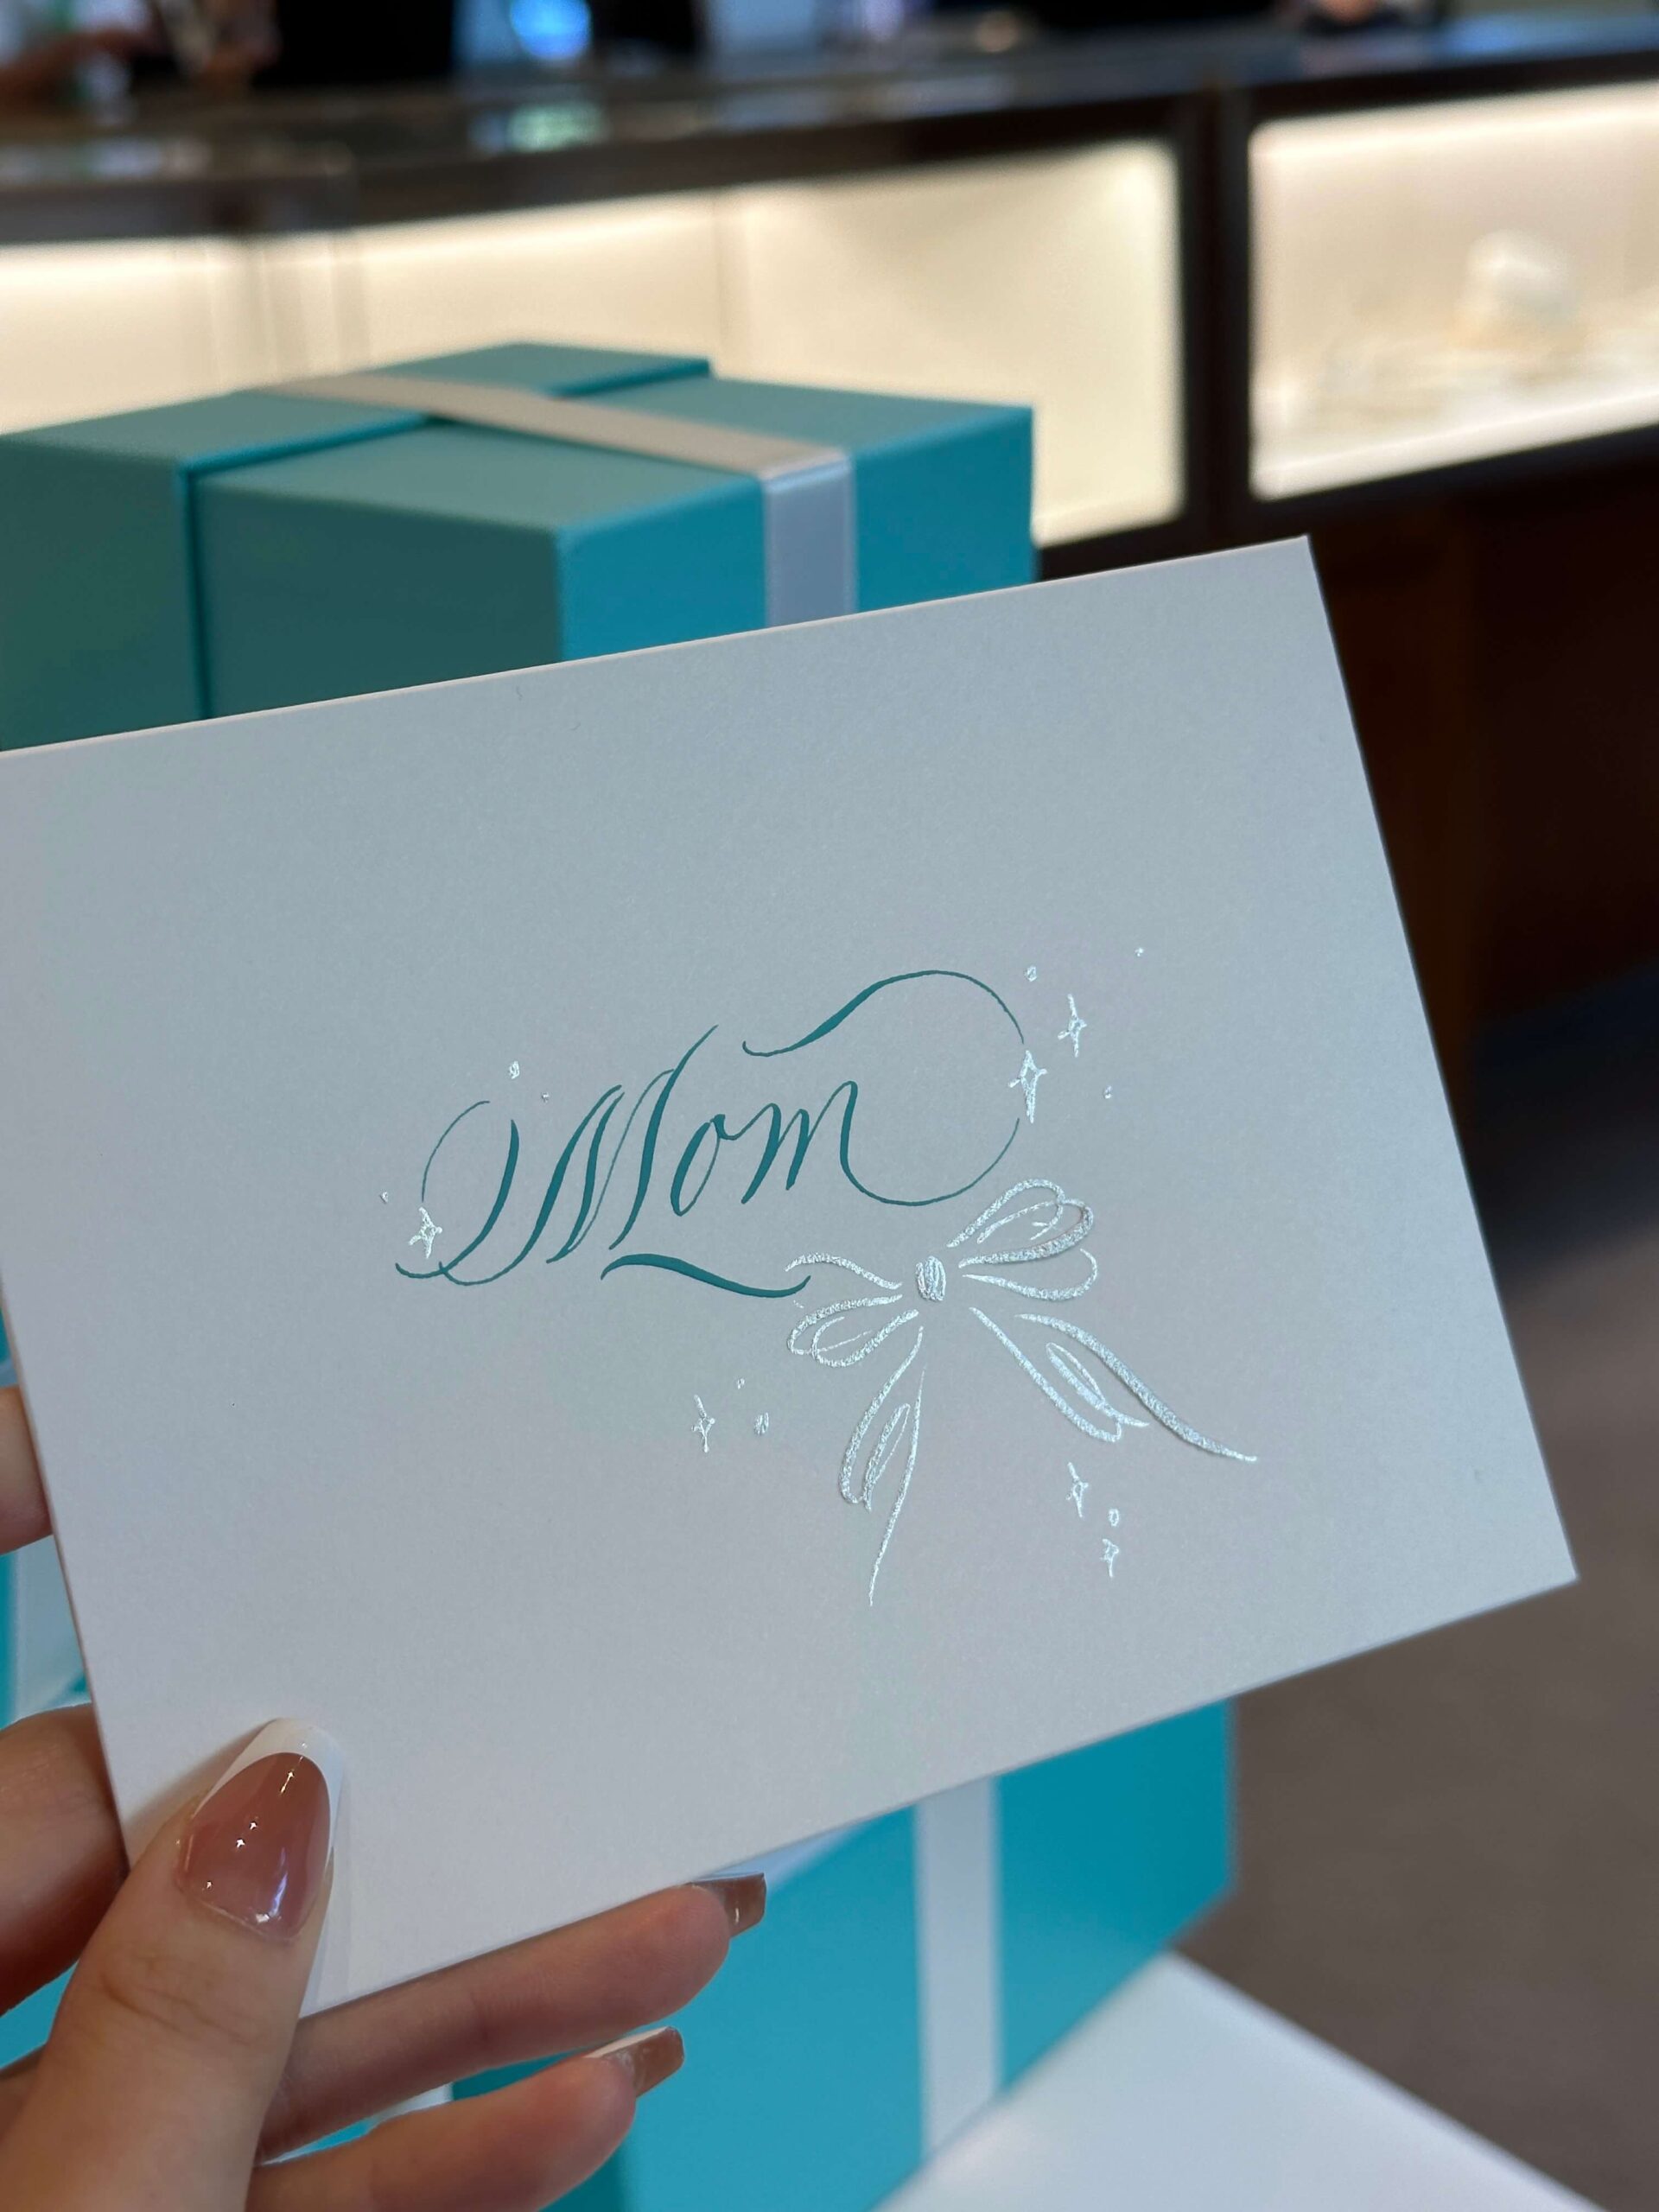 "Mom" written in blue ink calligraphy script with a silver bow.